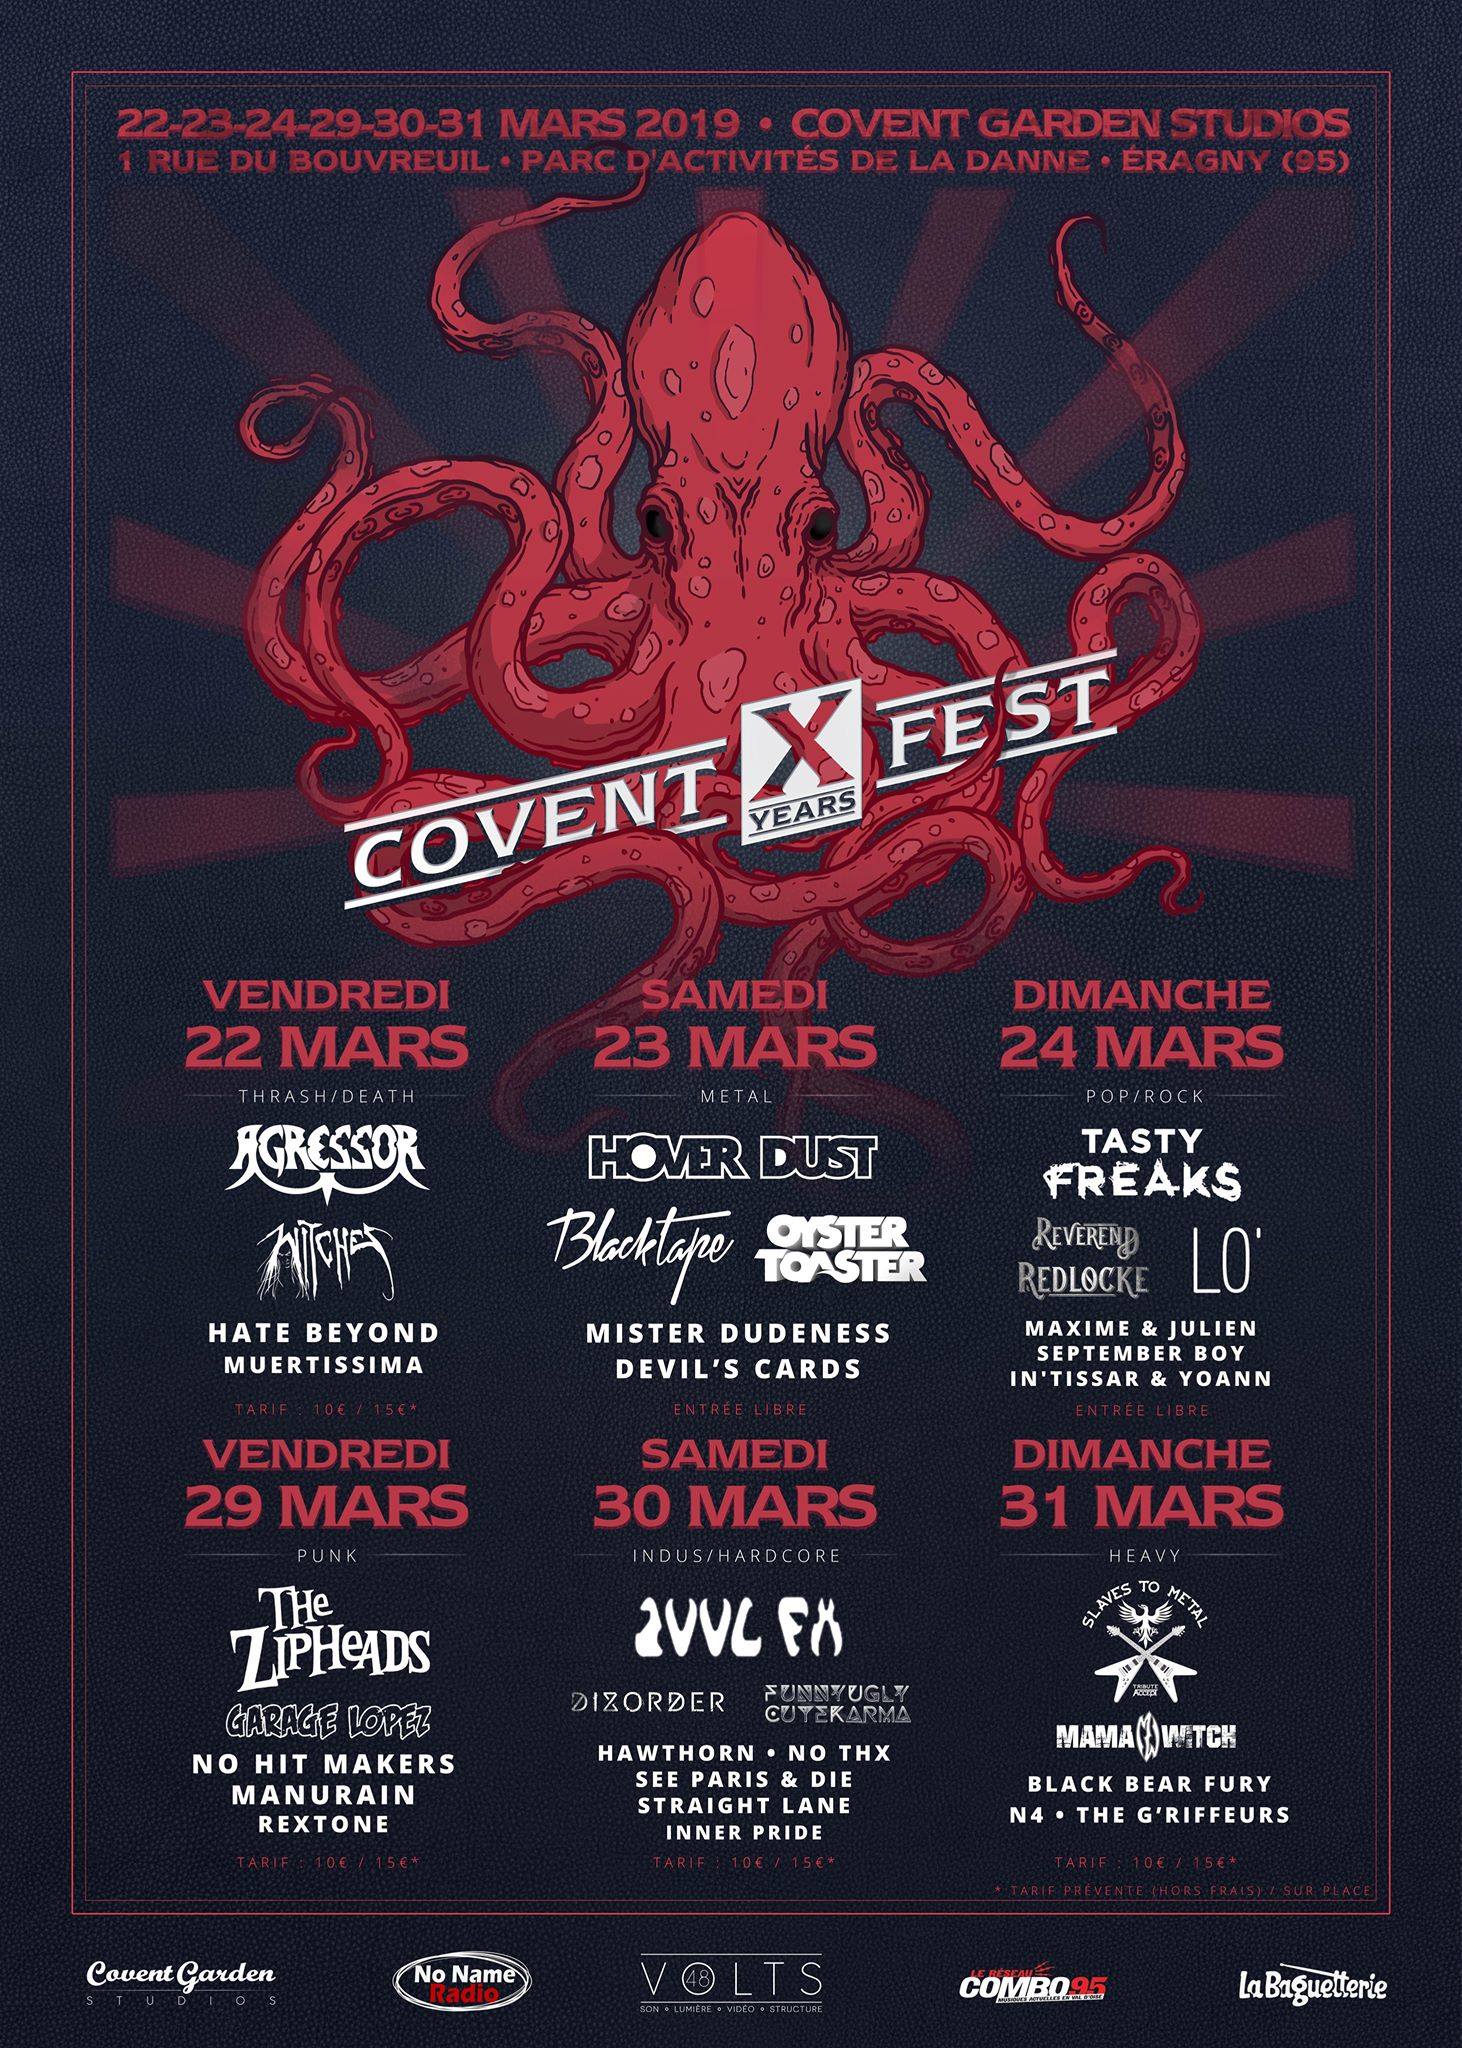 Witches flyer Agressor + Witches + Hate Beyond (JPN) + Muertissima @ Covent X Years Fest Covent Garden Eragny (95), Fr